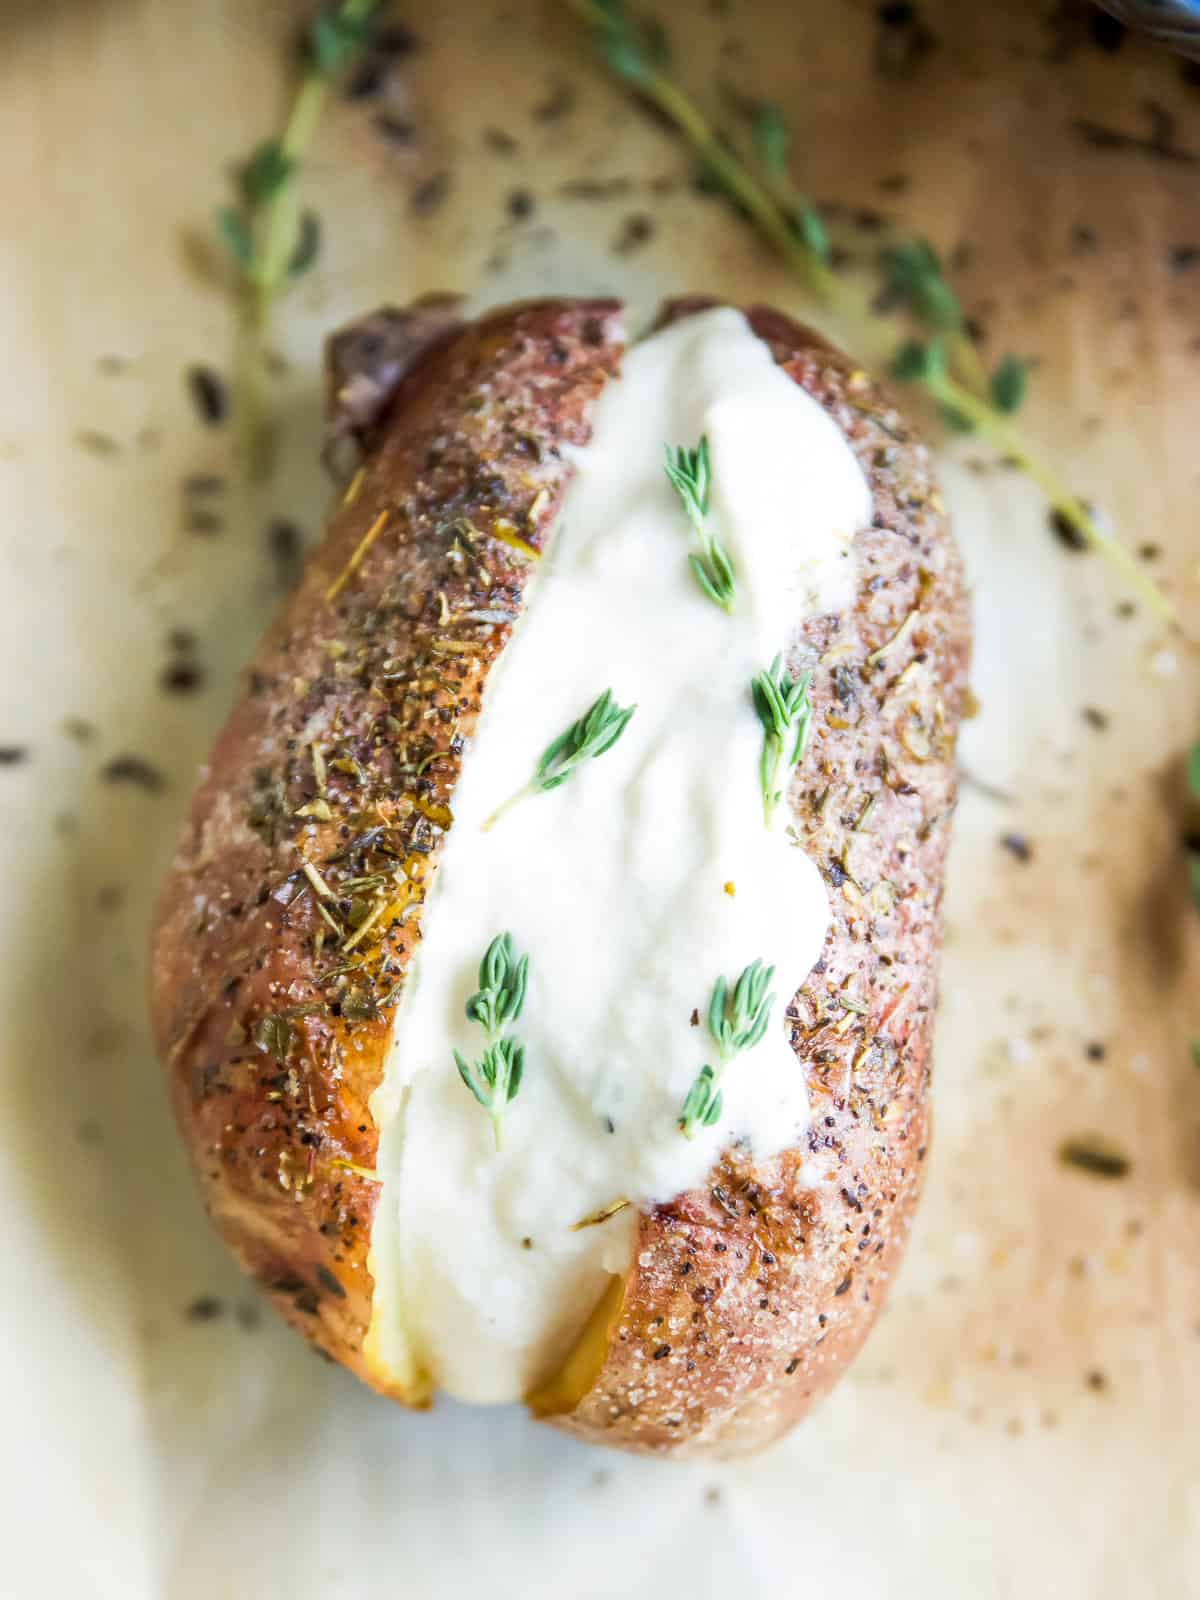 A baked potato topped with vegan sour cream and fresh rosemary.